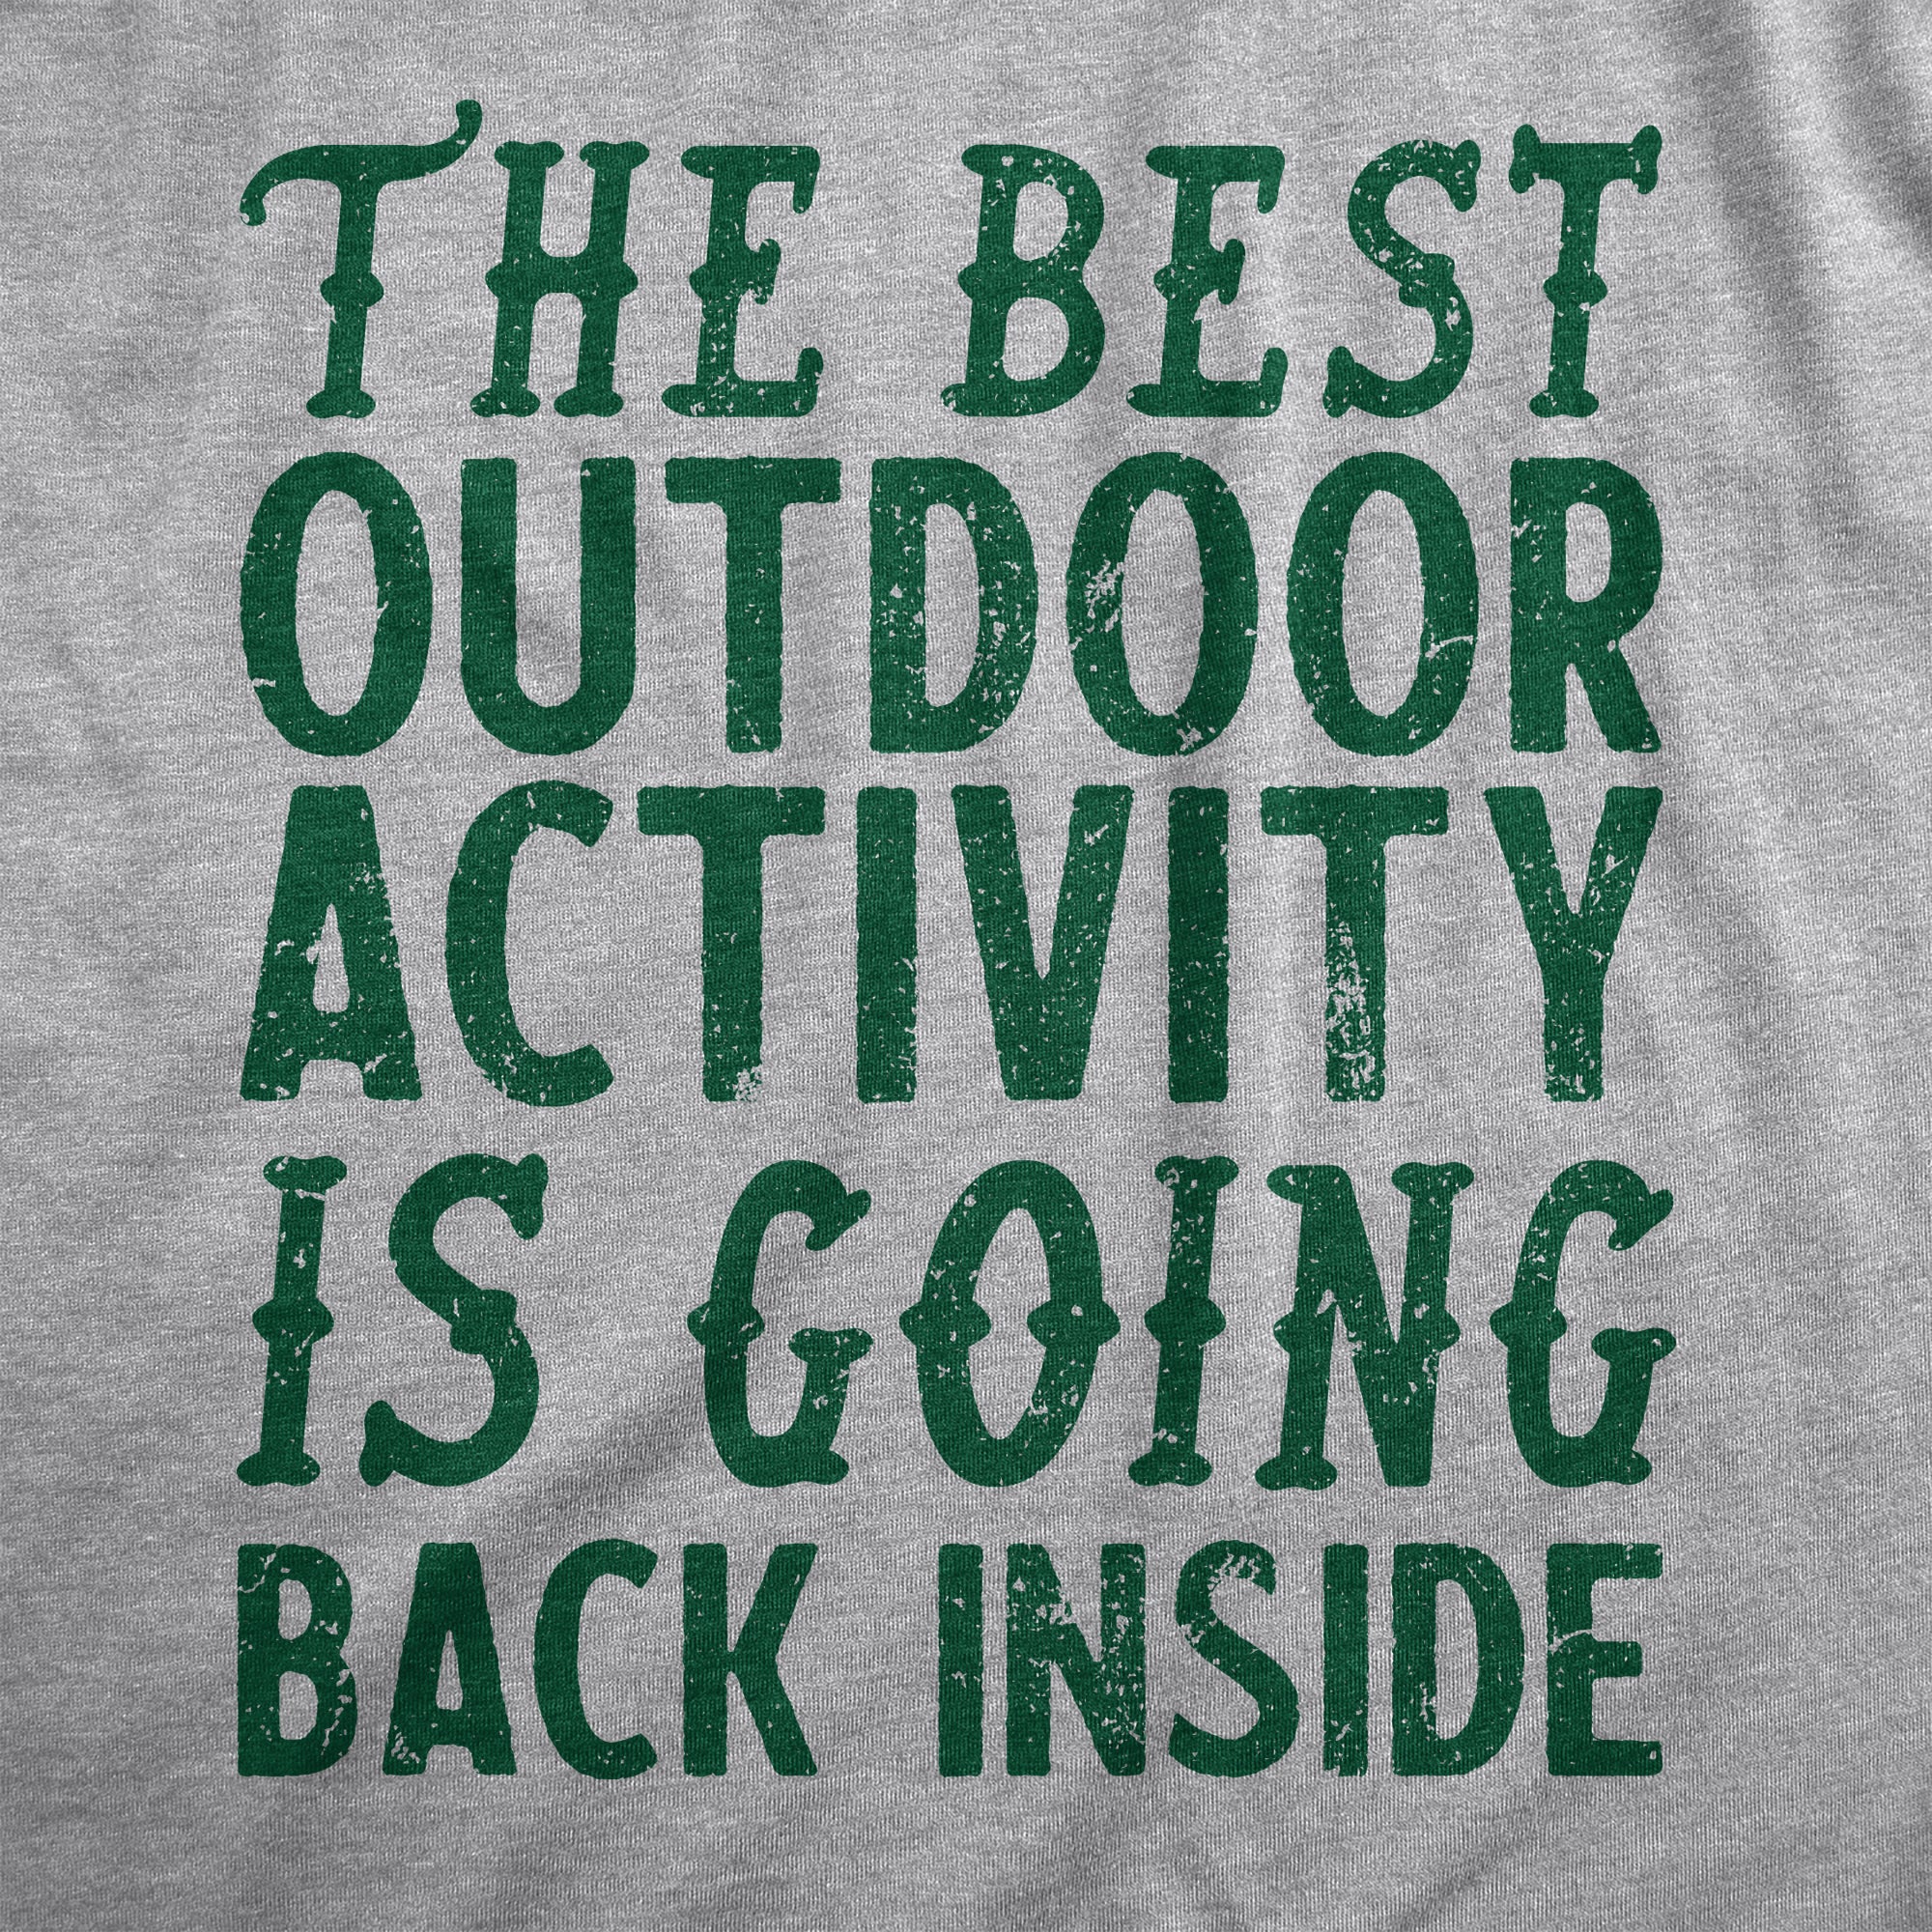 Funny Light Heather Grey - OUTDOOR The Best Outdoor Activity Is Going Back Inside Mens T Shirt Nerdy introvert sarcastic Tee